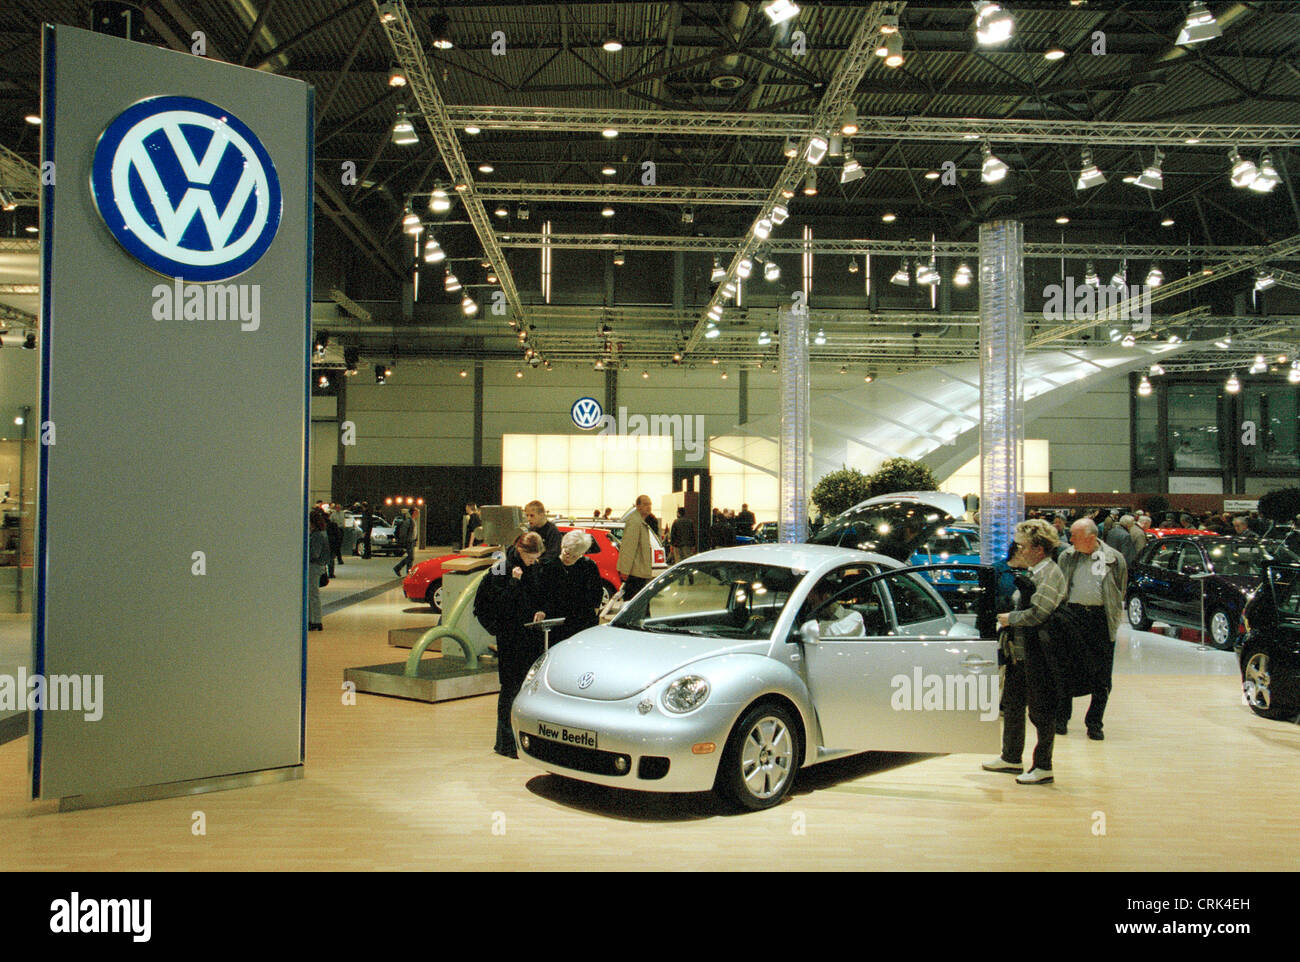 Volkswagen booth at the fair Auto Mobil International Stock Photo